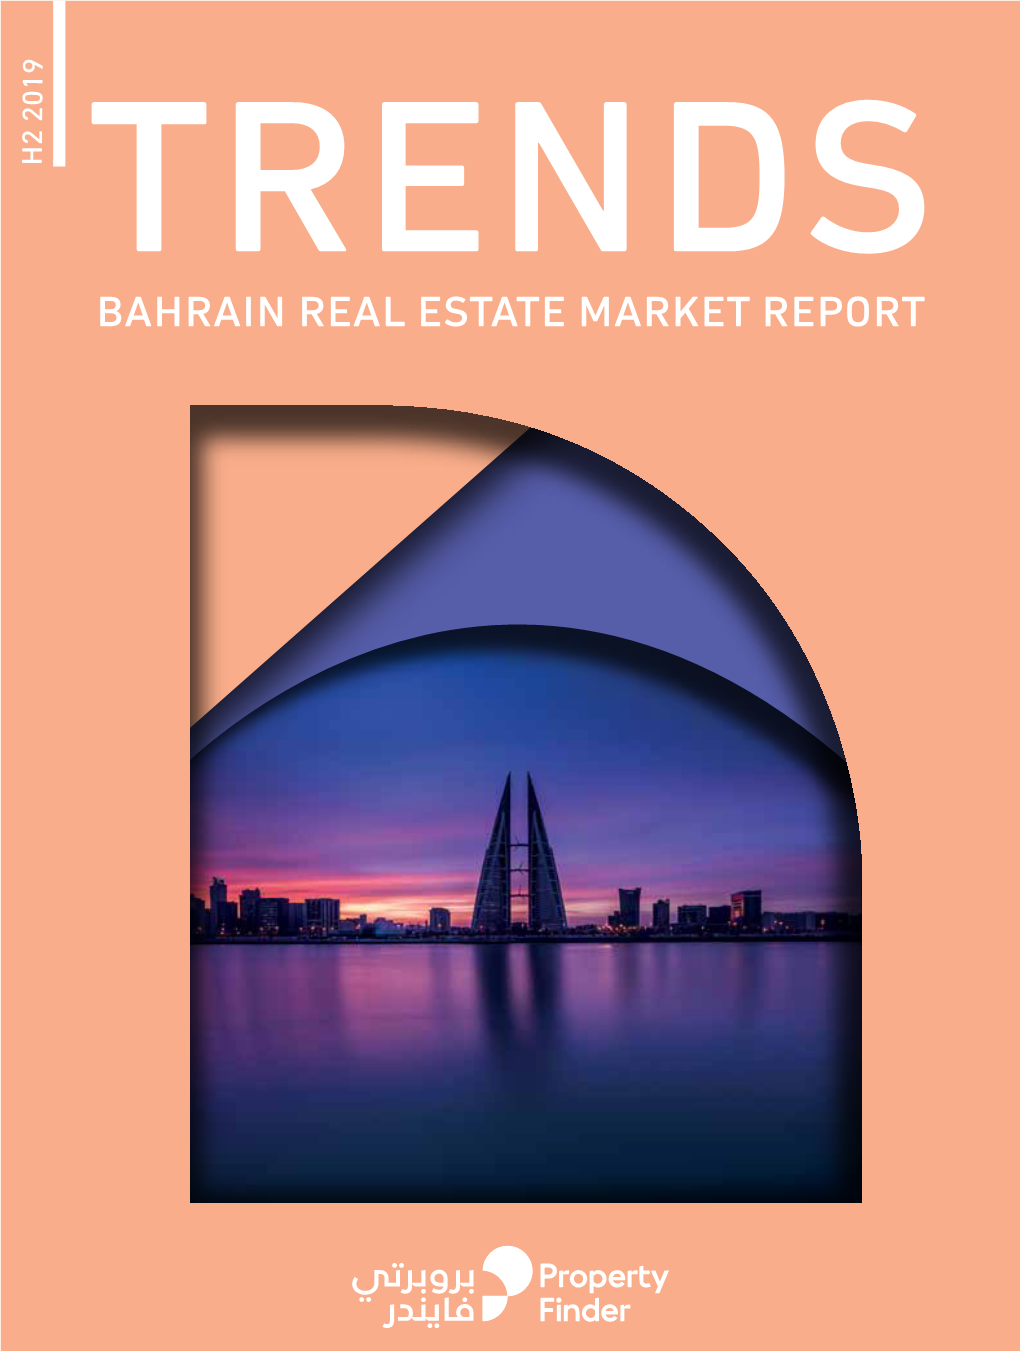 Bahrain Real Estate Market Report in This Issue Issue No